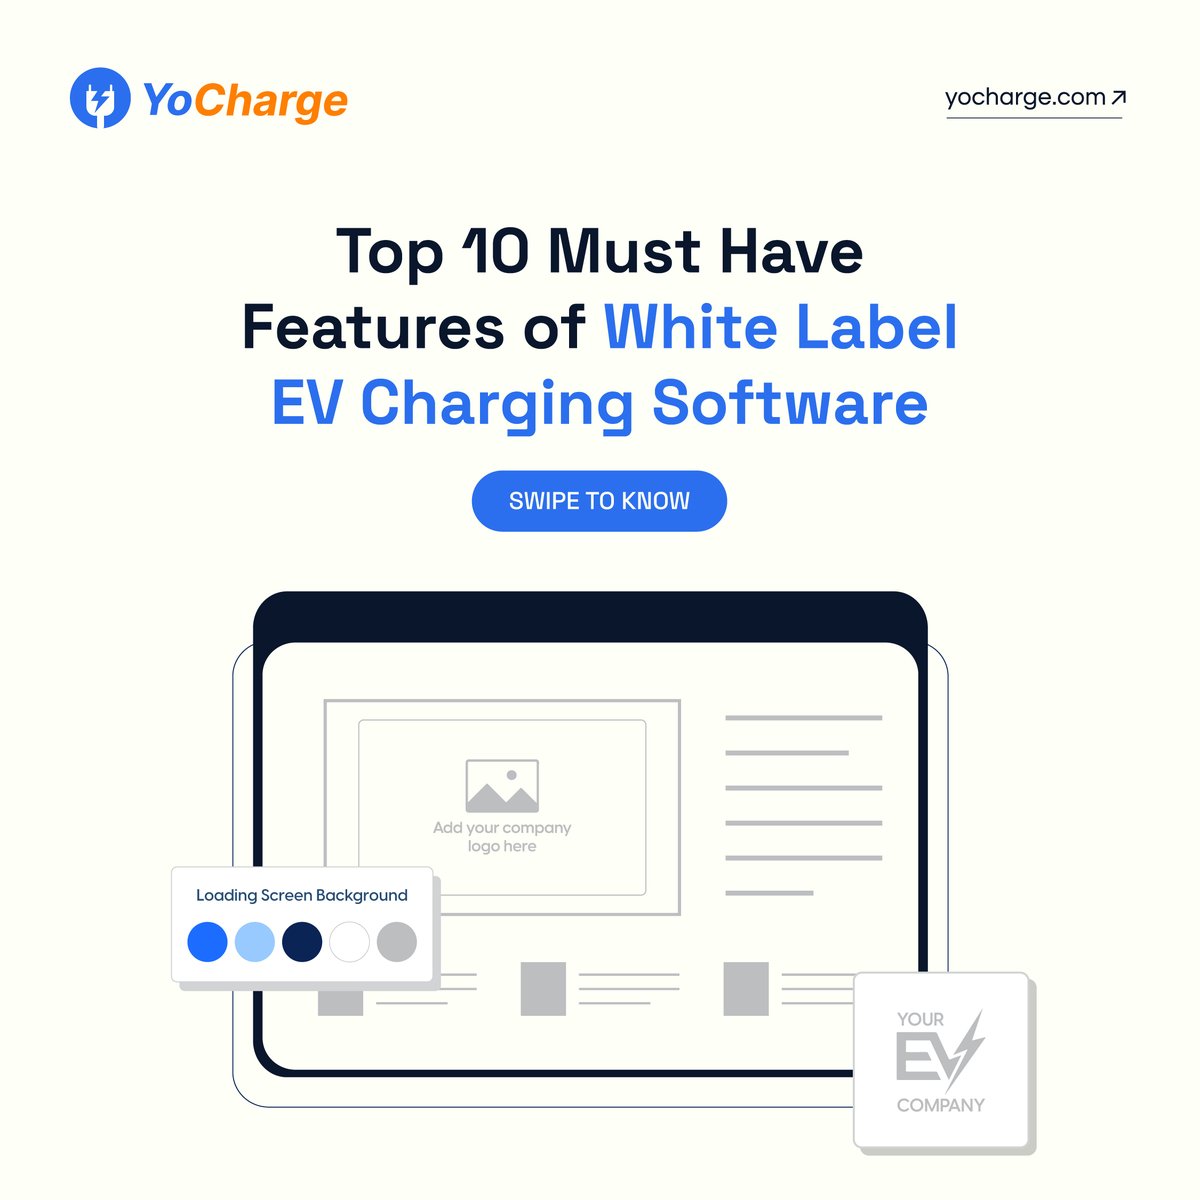 Unlock the Power of White-label EV Charging Software! 

Check out our Top 10 Must-Have Features for a Seamless EV Charging Experience!

#features #softwarefeatures #evcharging #evchargingsoftware #topsoftware #whitelabelsoftware #yocharge #chargingsoftware